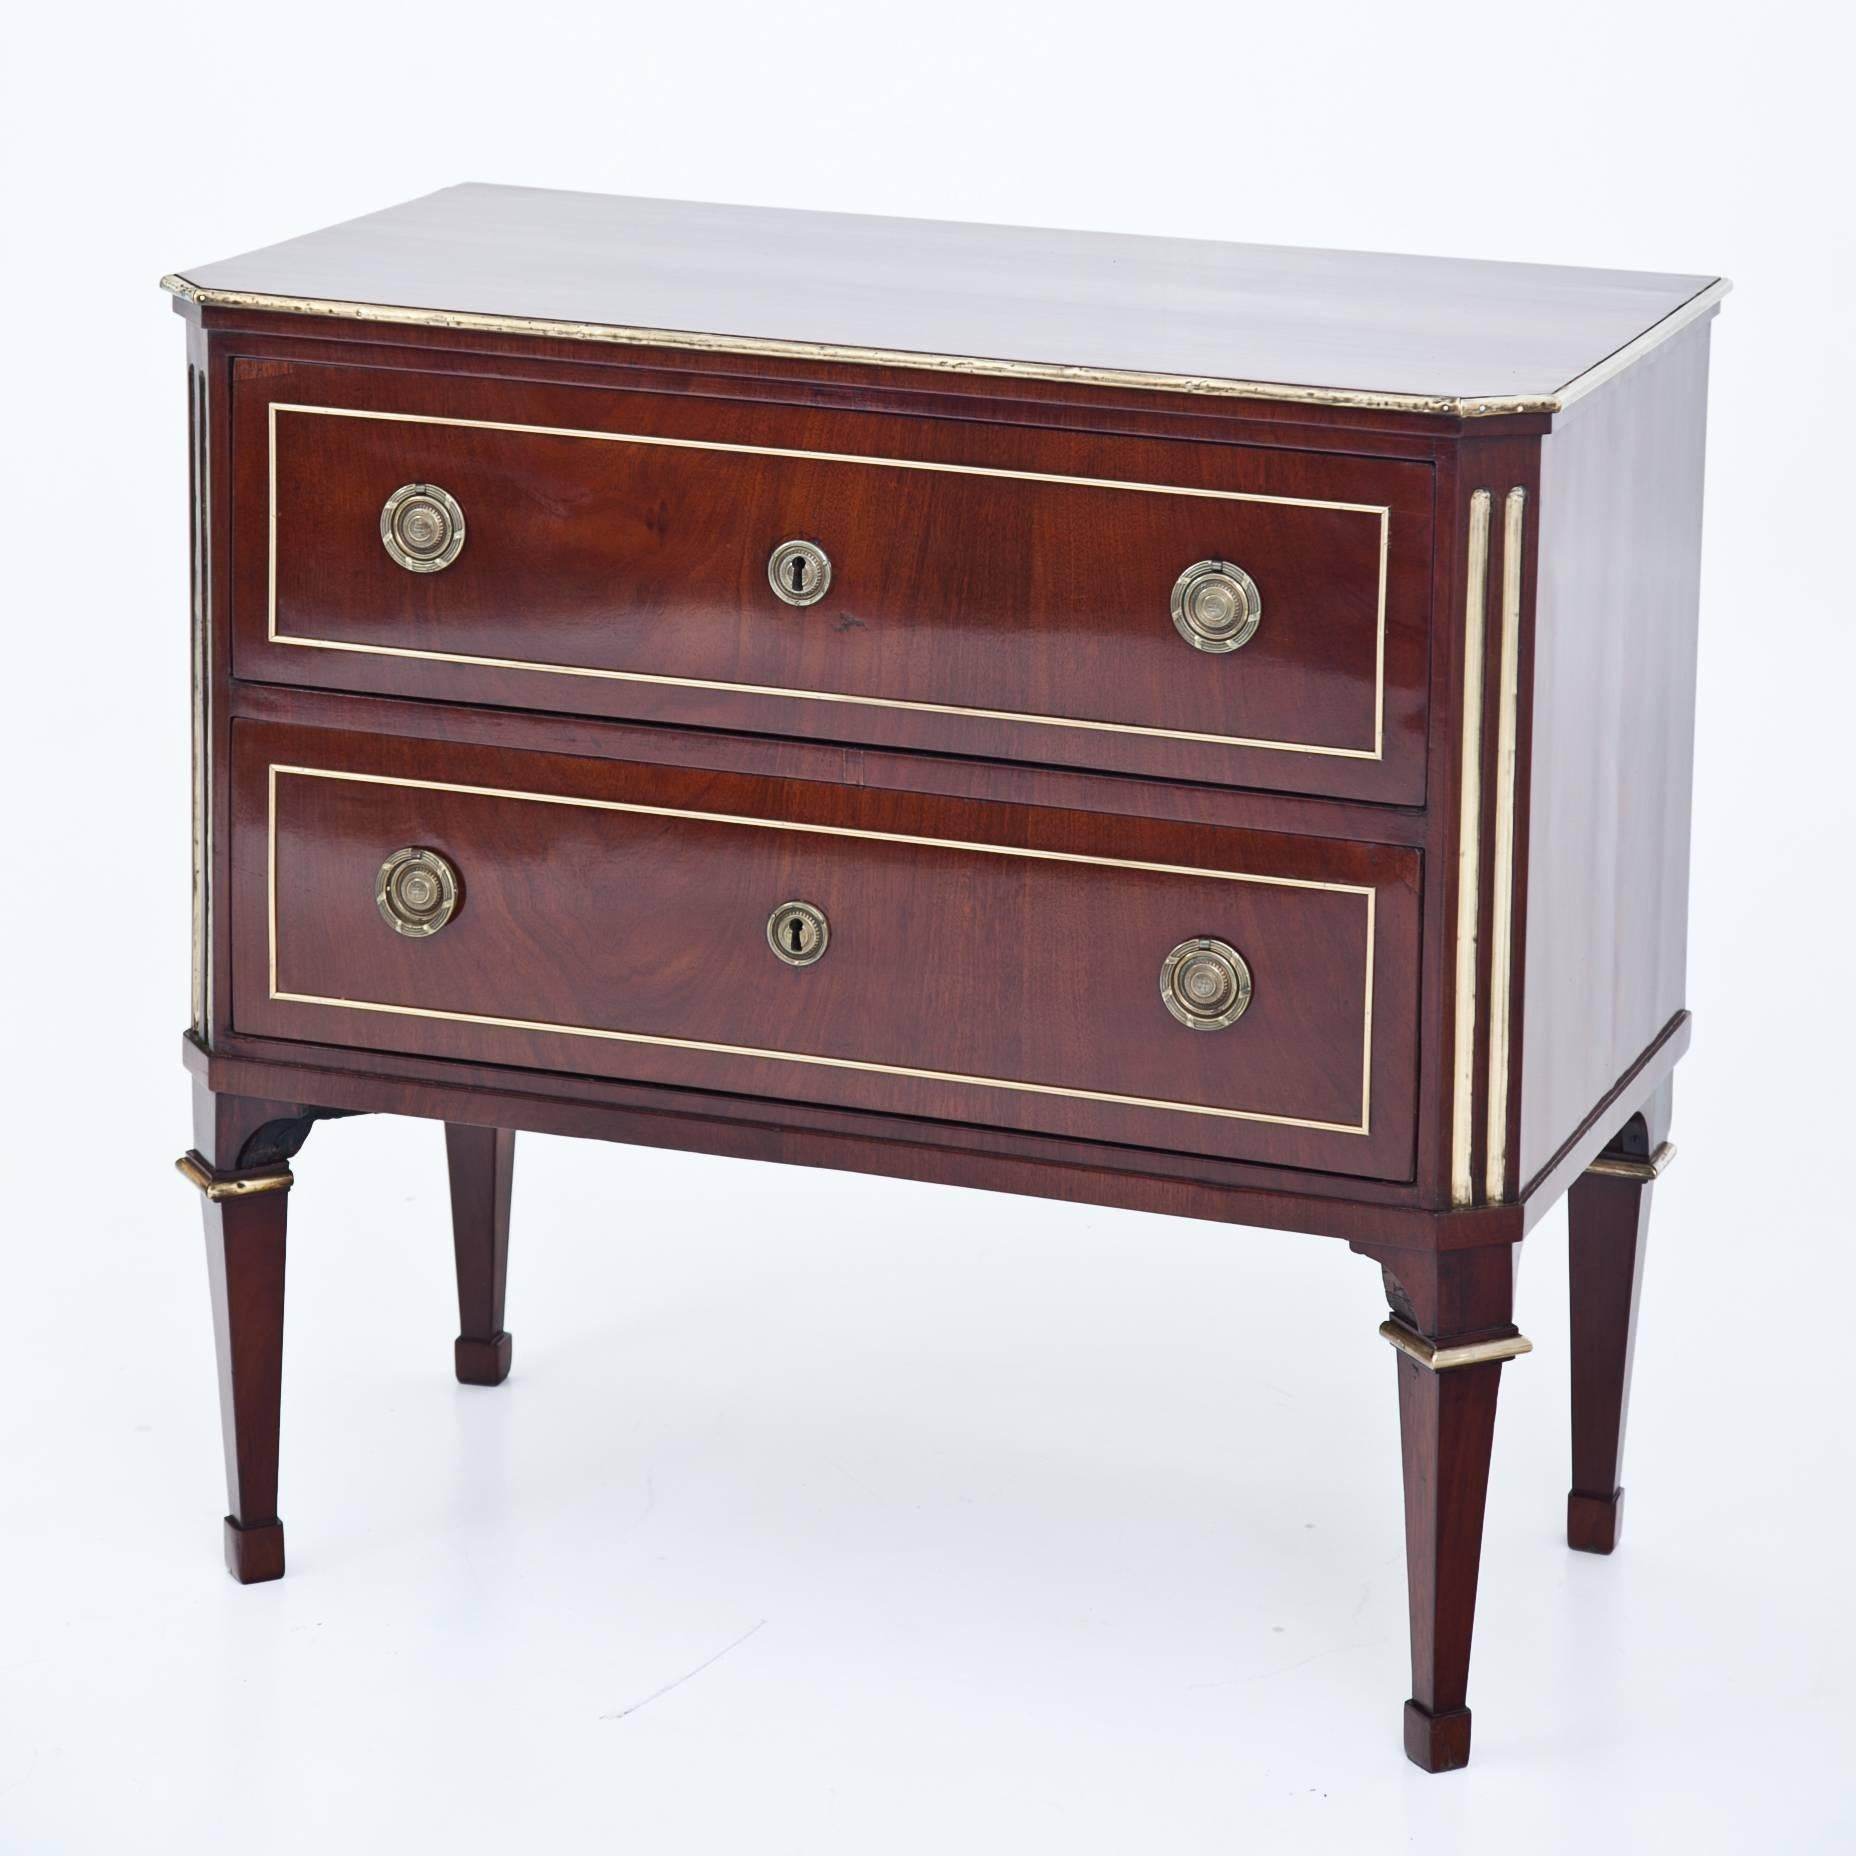 Brass Neoclassical Mahogany Chest of Drawers, France, First Half of the 19th Century